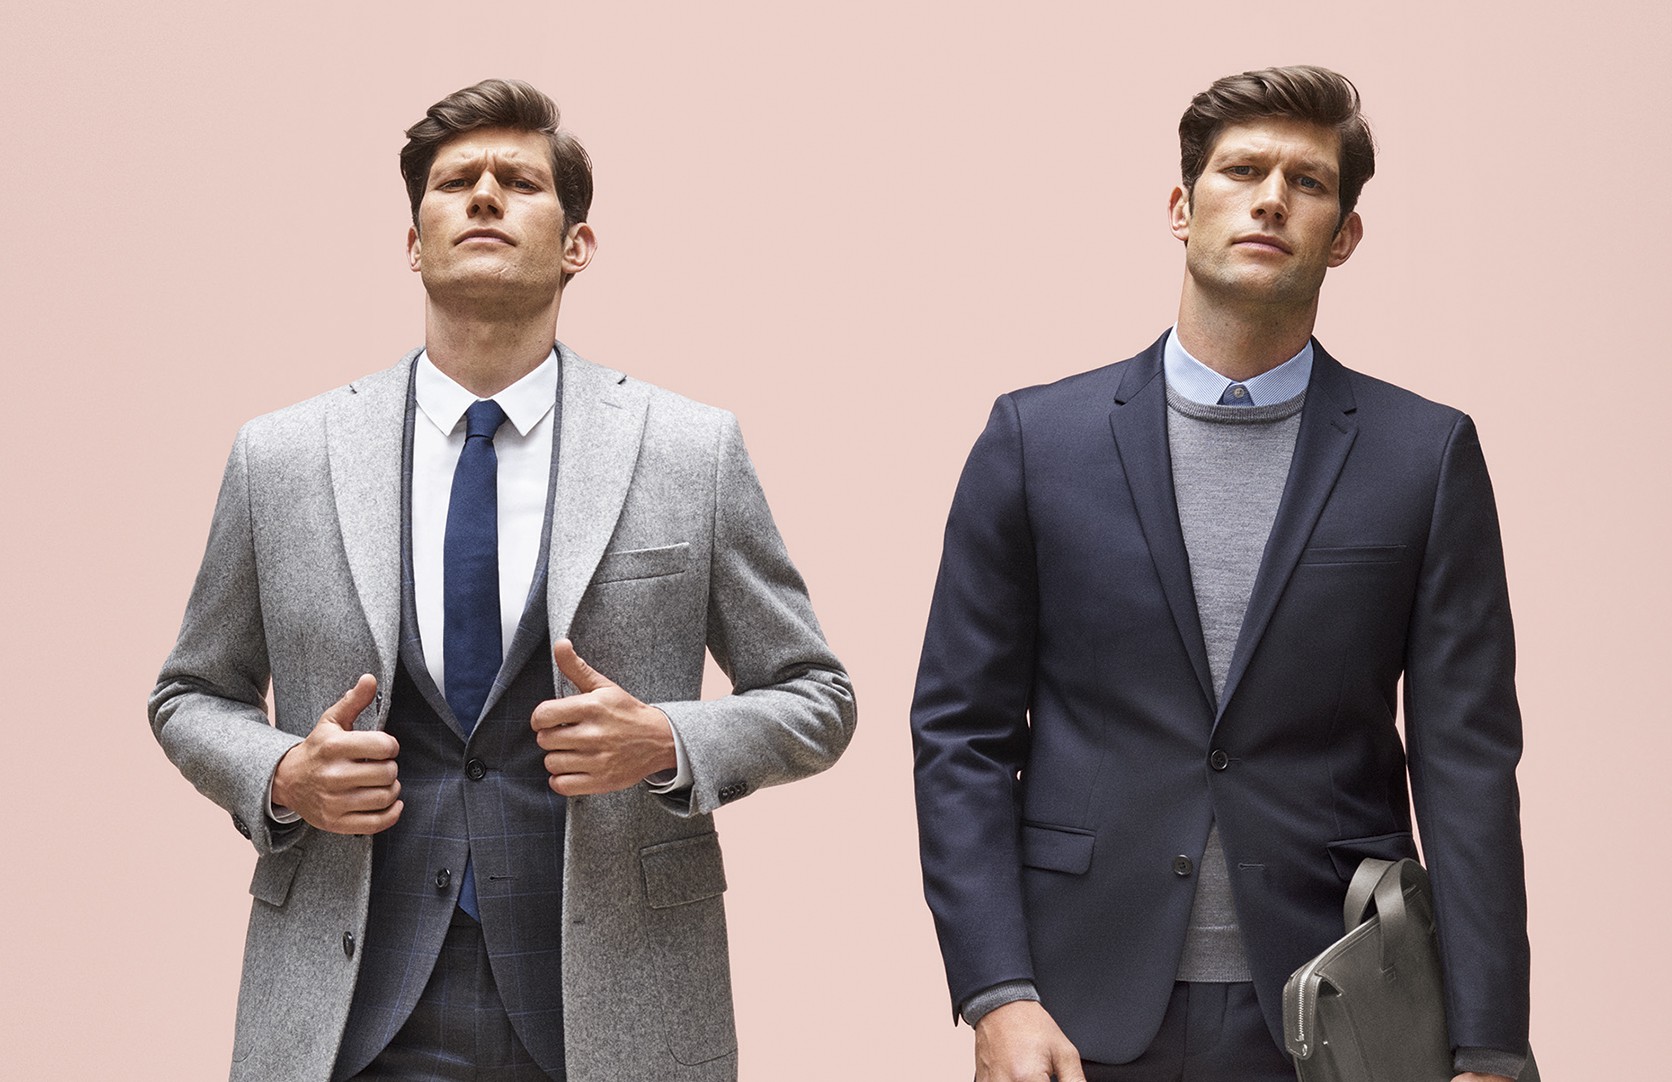 How to wear a suit ?